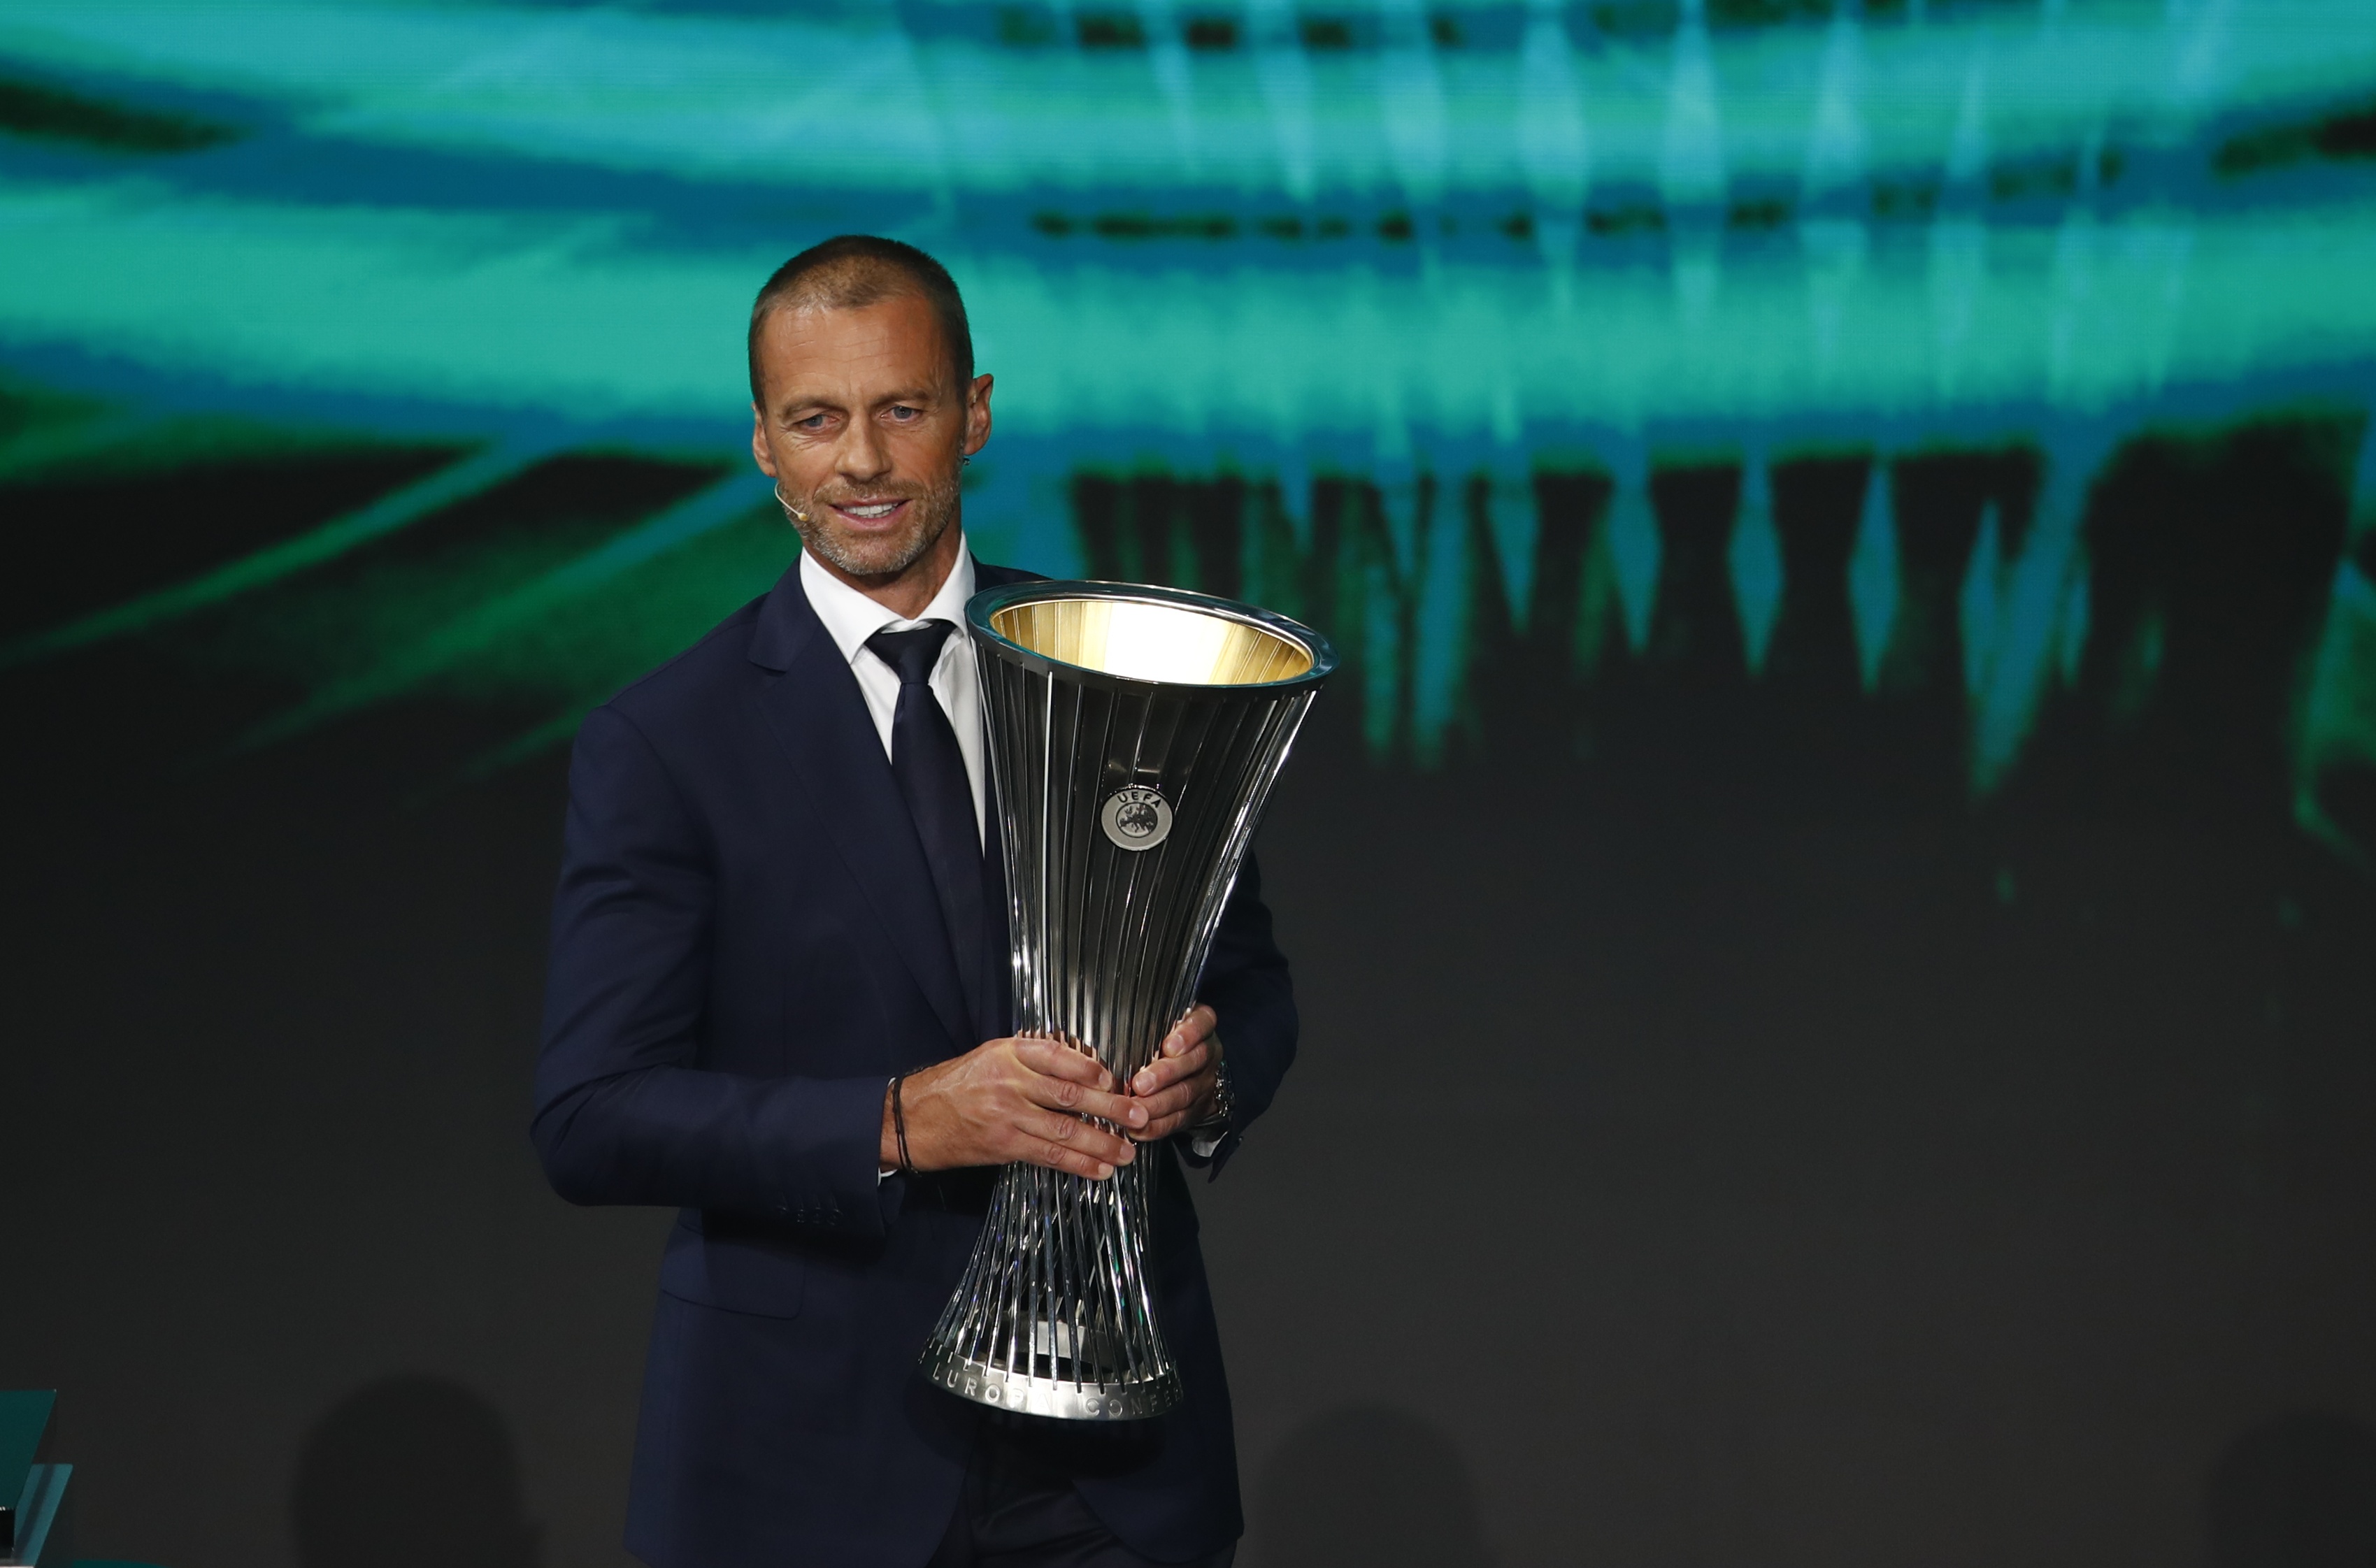 Europa League and Europa Conference League Group Stage Draws